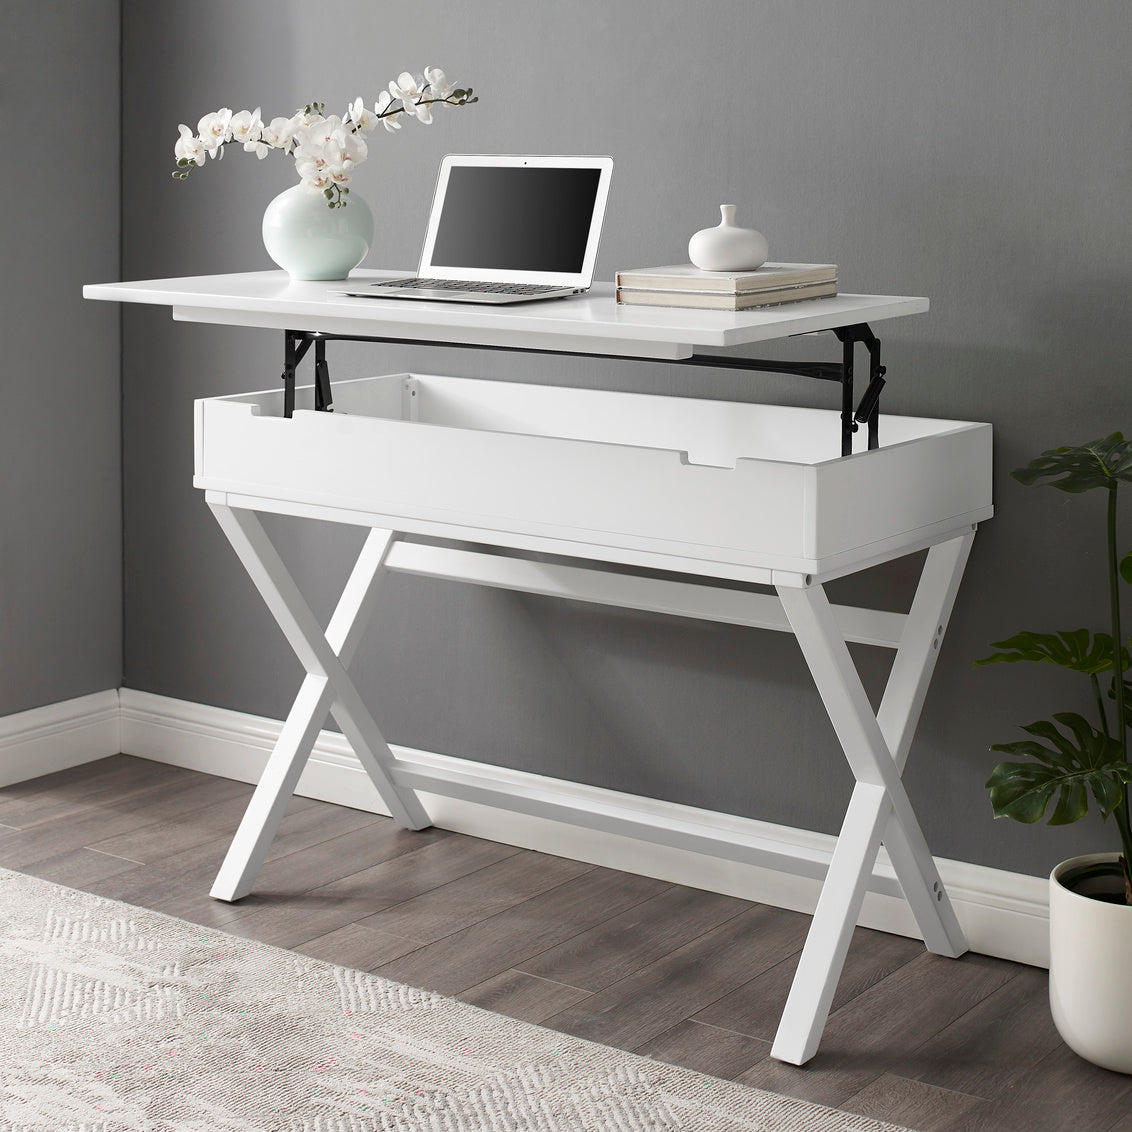 WEEKLY or MONTHLY. Amazing White Lift Top Desk